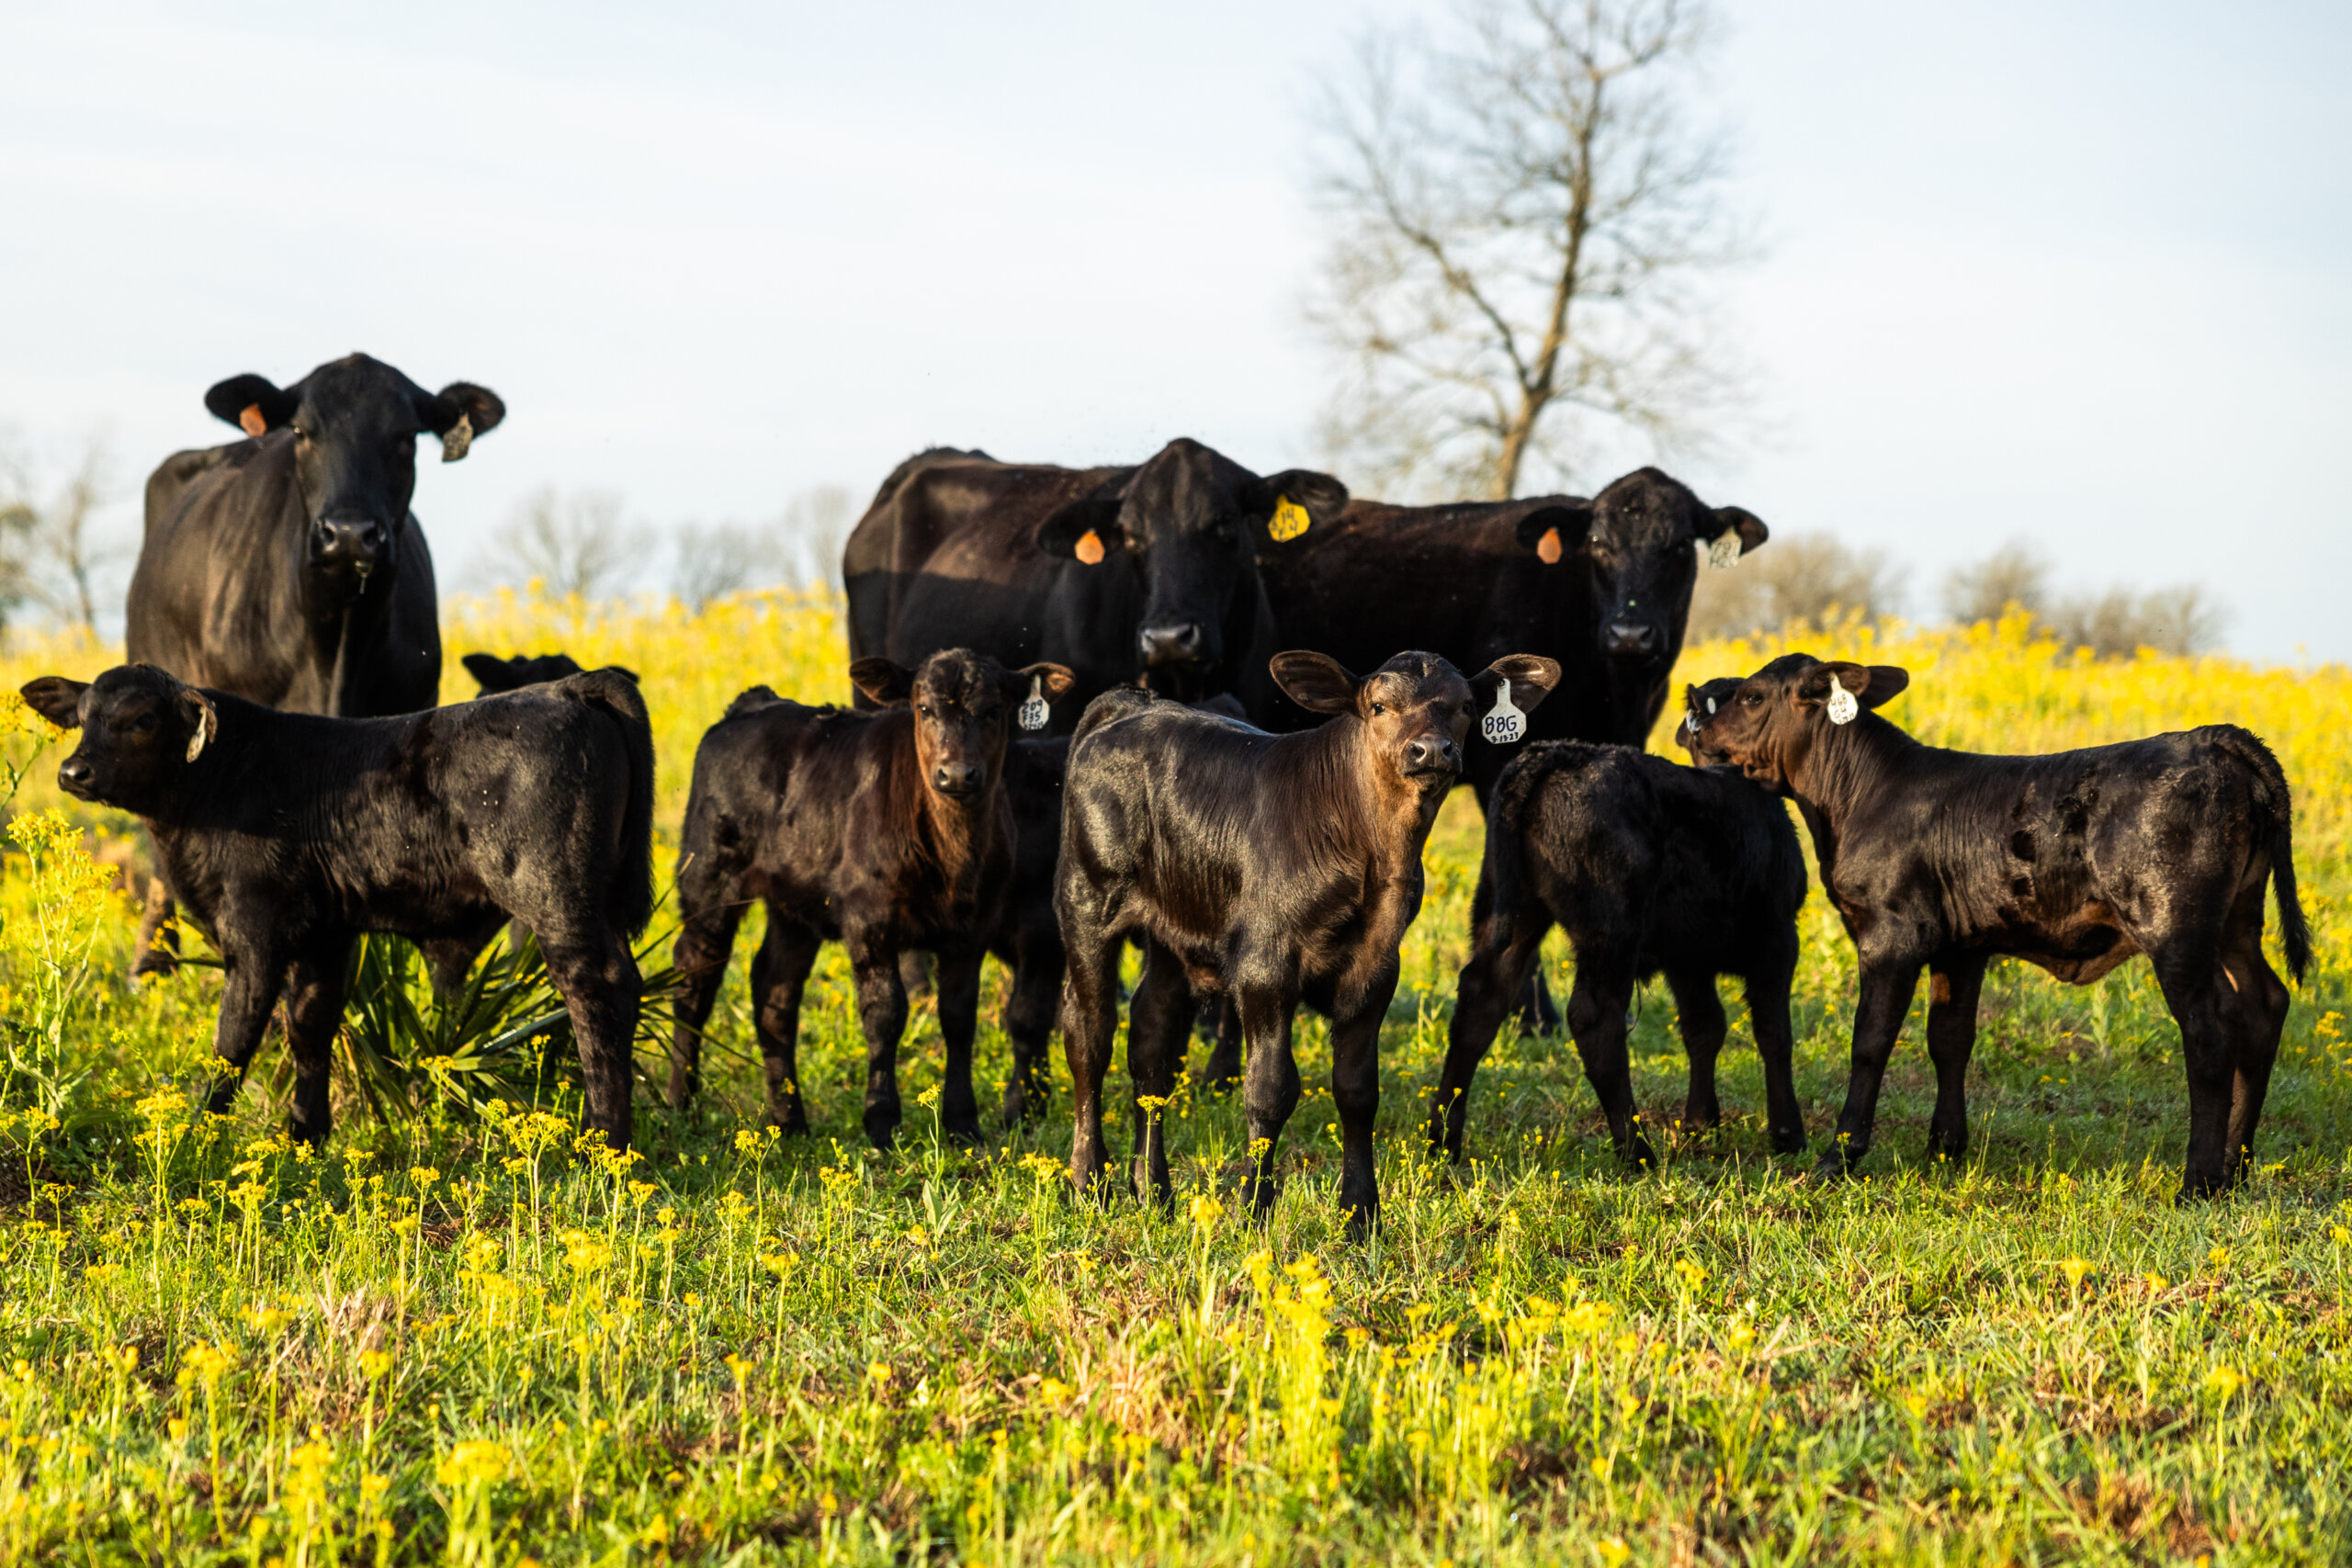 A group of ultrablack cows on open pasture